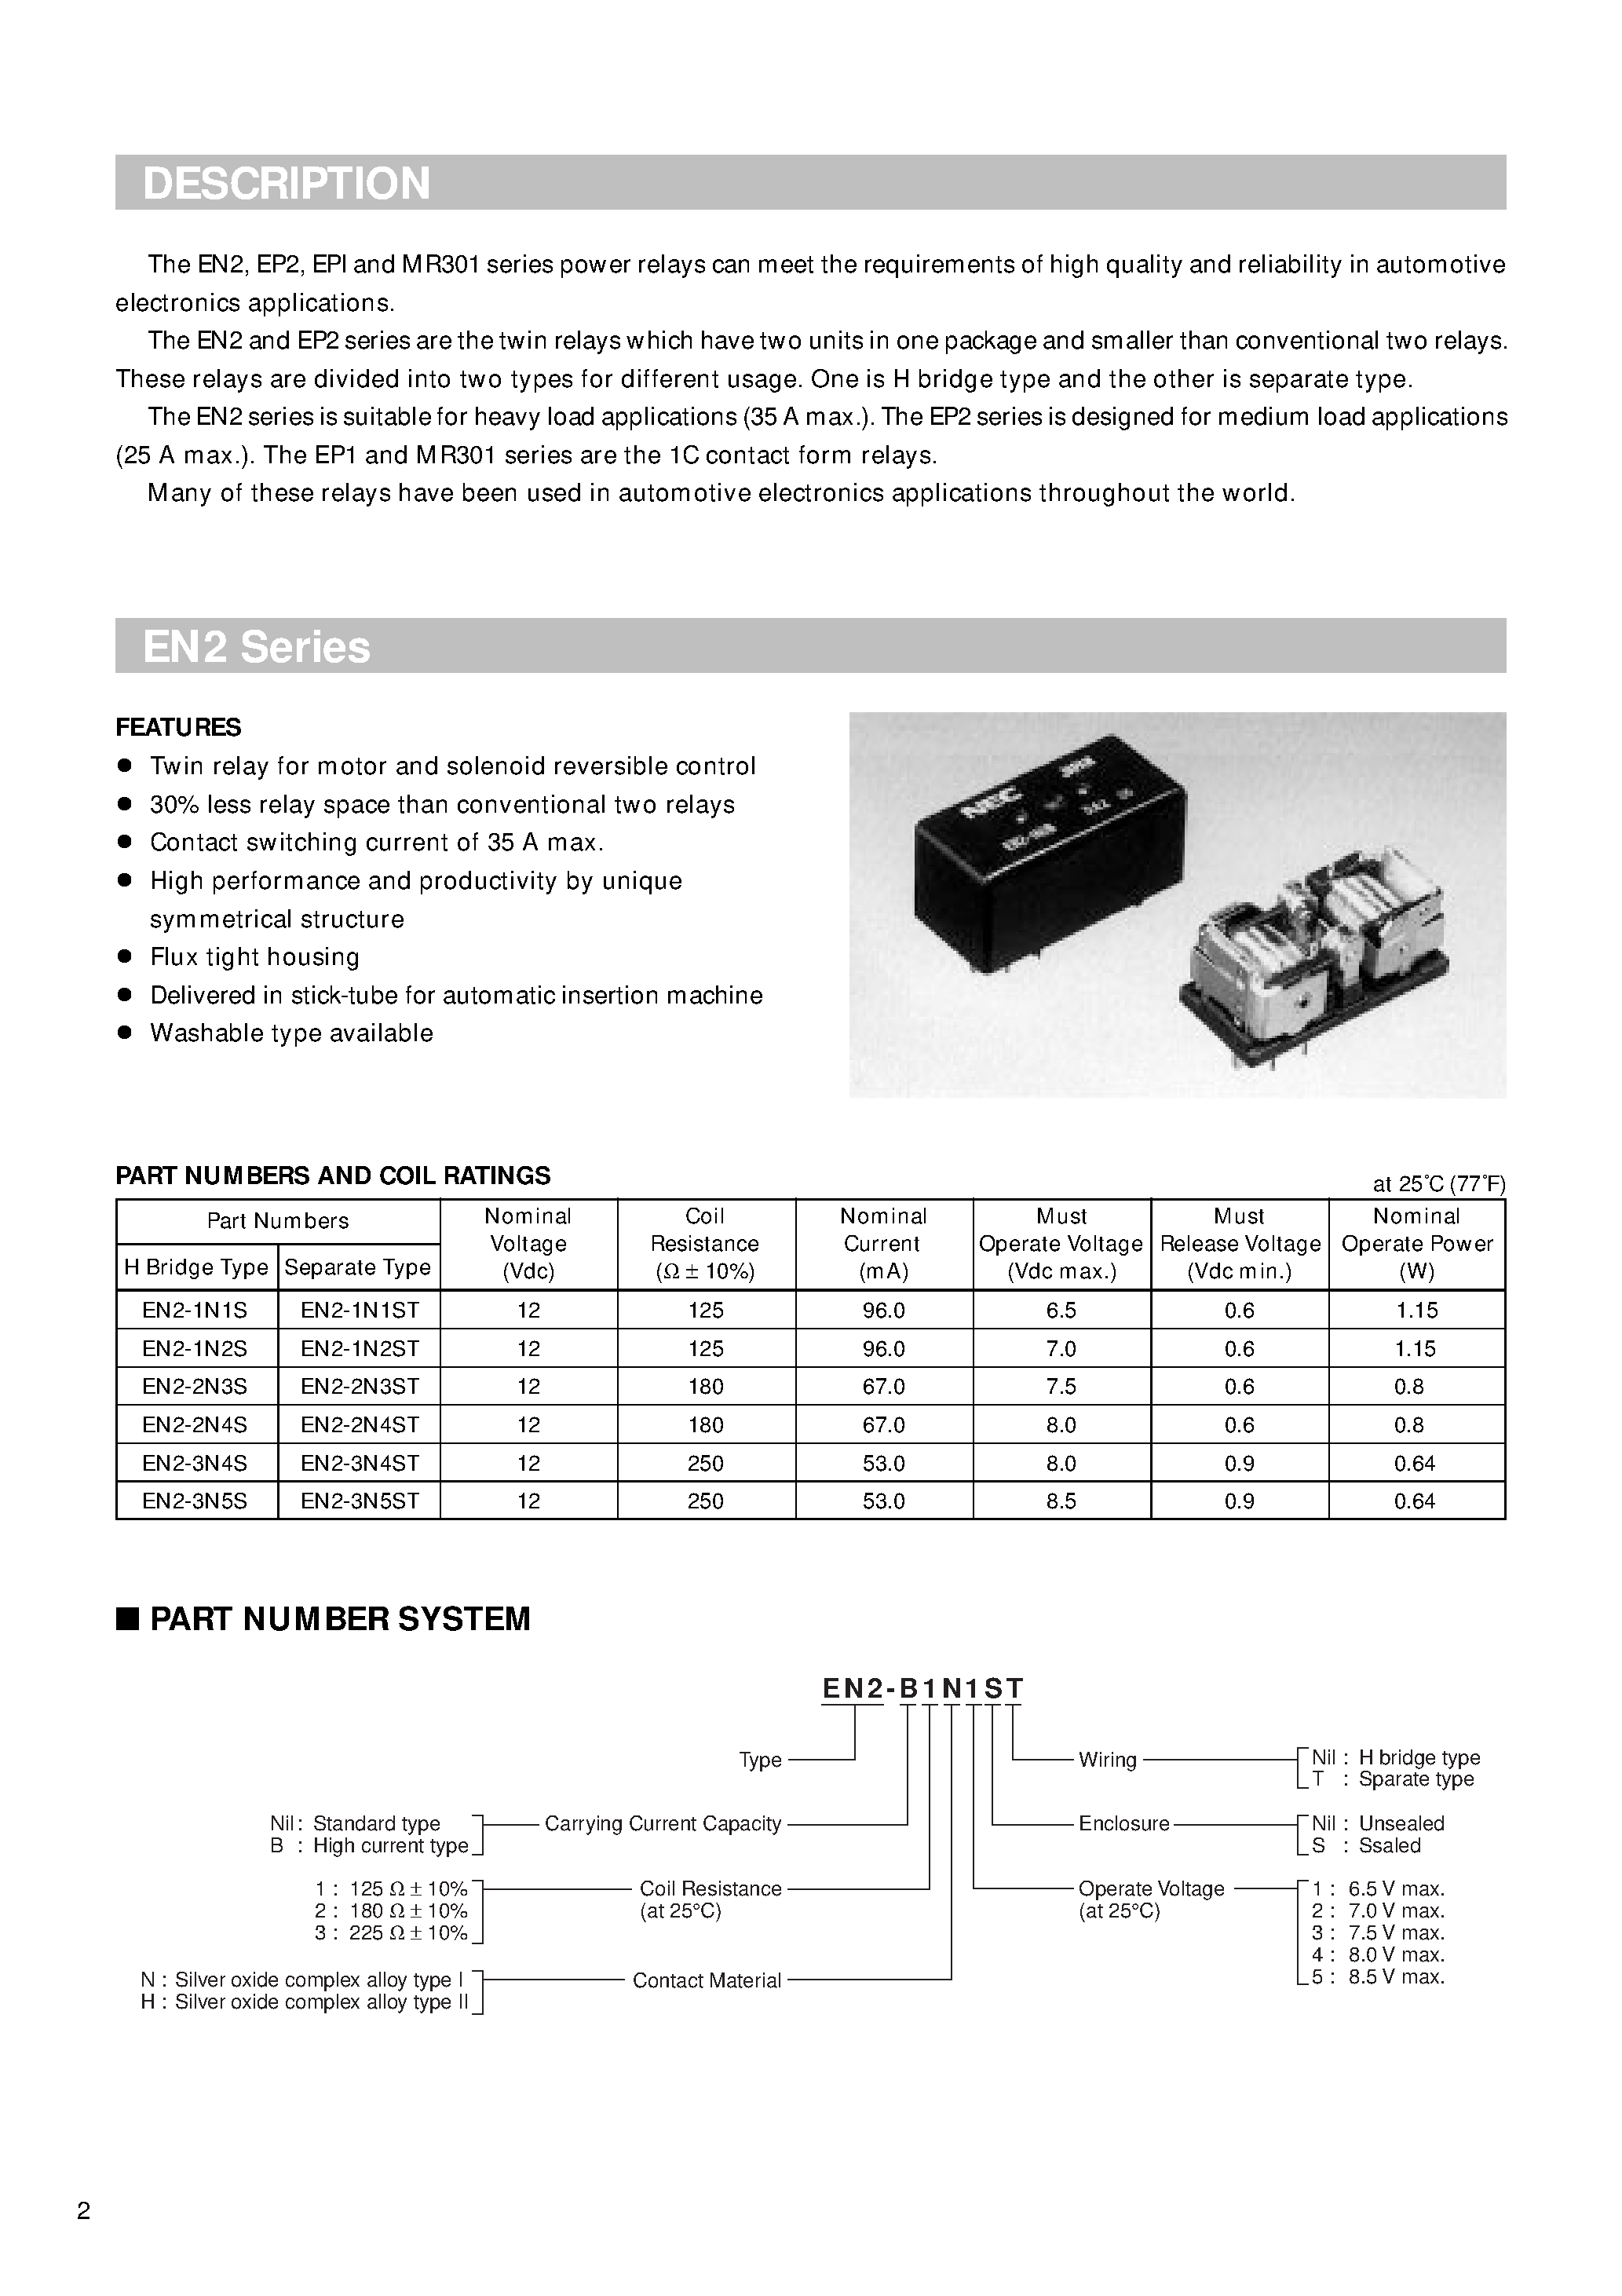 Datasheet EN2-1N4ST - Twin relay for motor and solenoid reversible control page 2